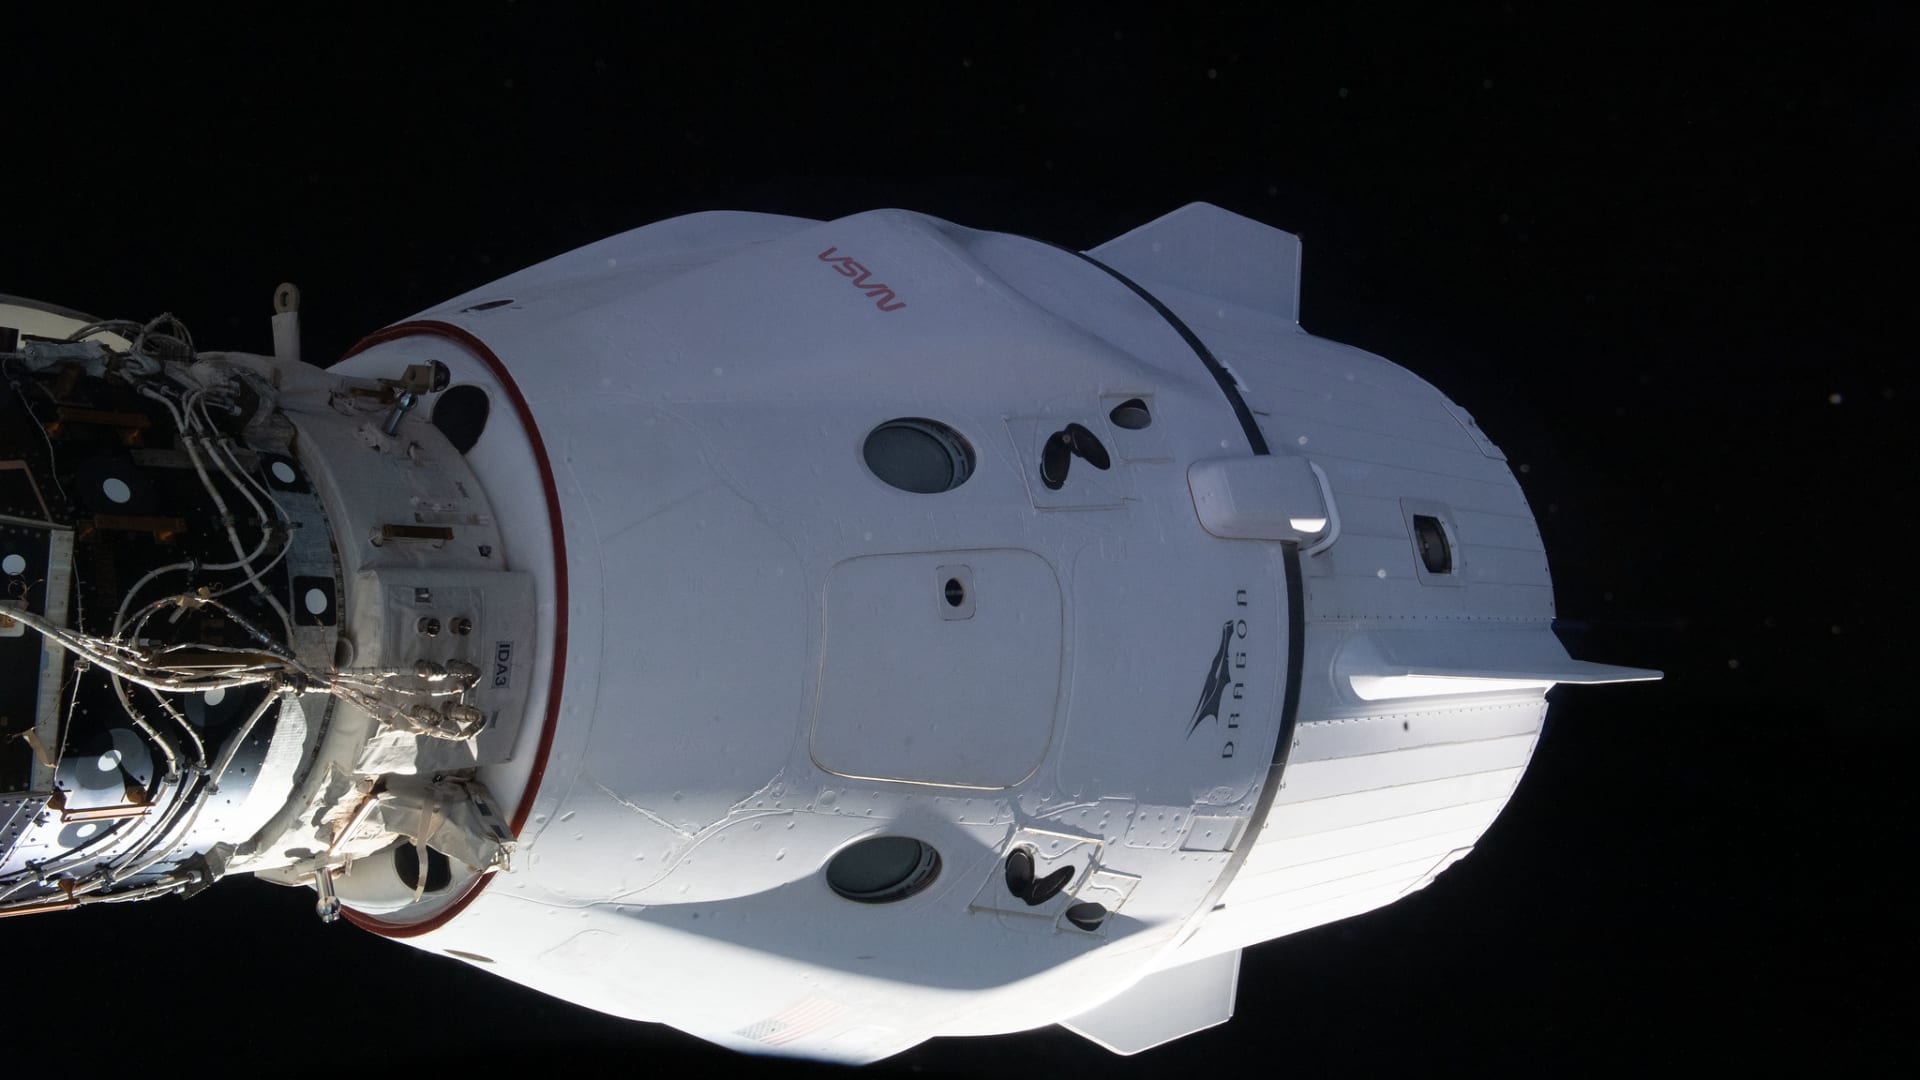 SpaceX's Crew Dragon capsule Freedom docked to the International Space Station.